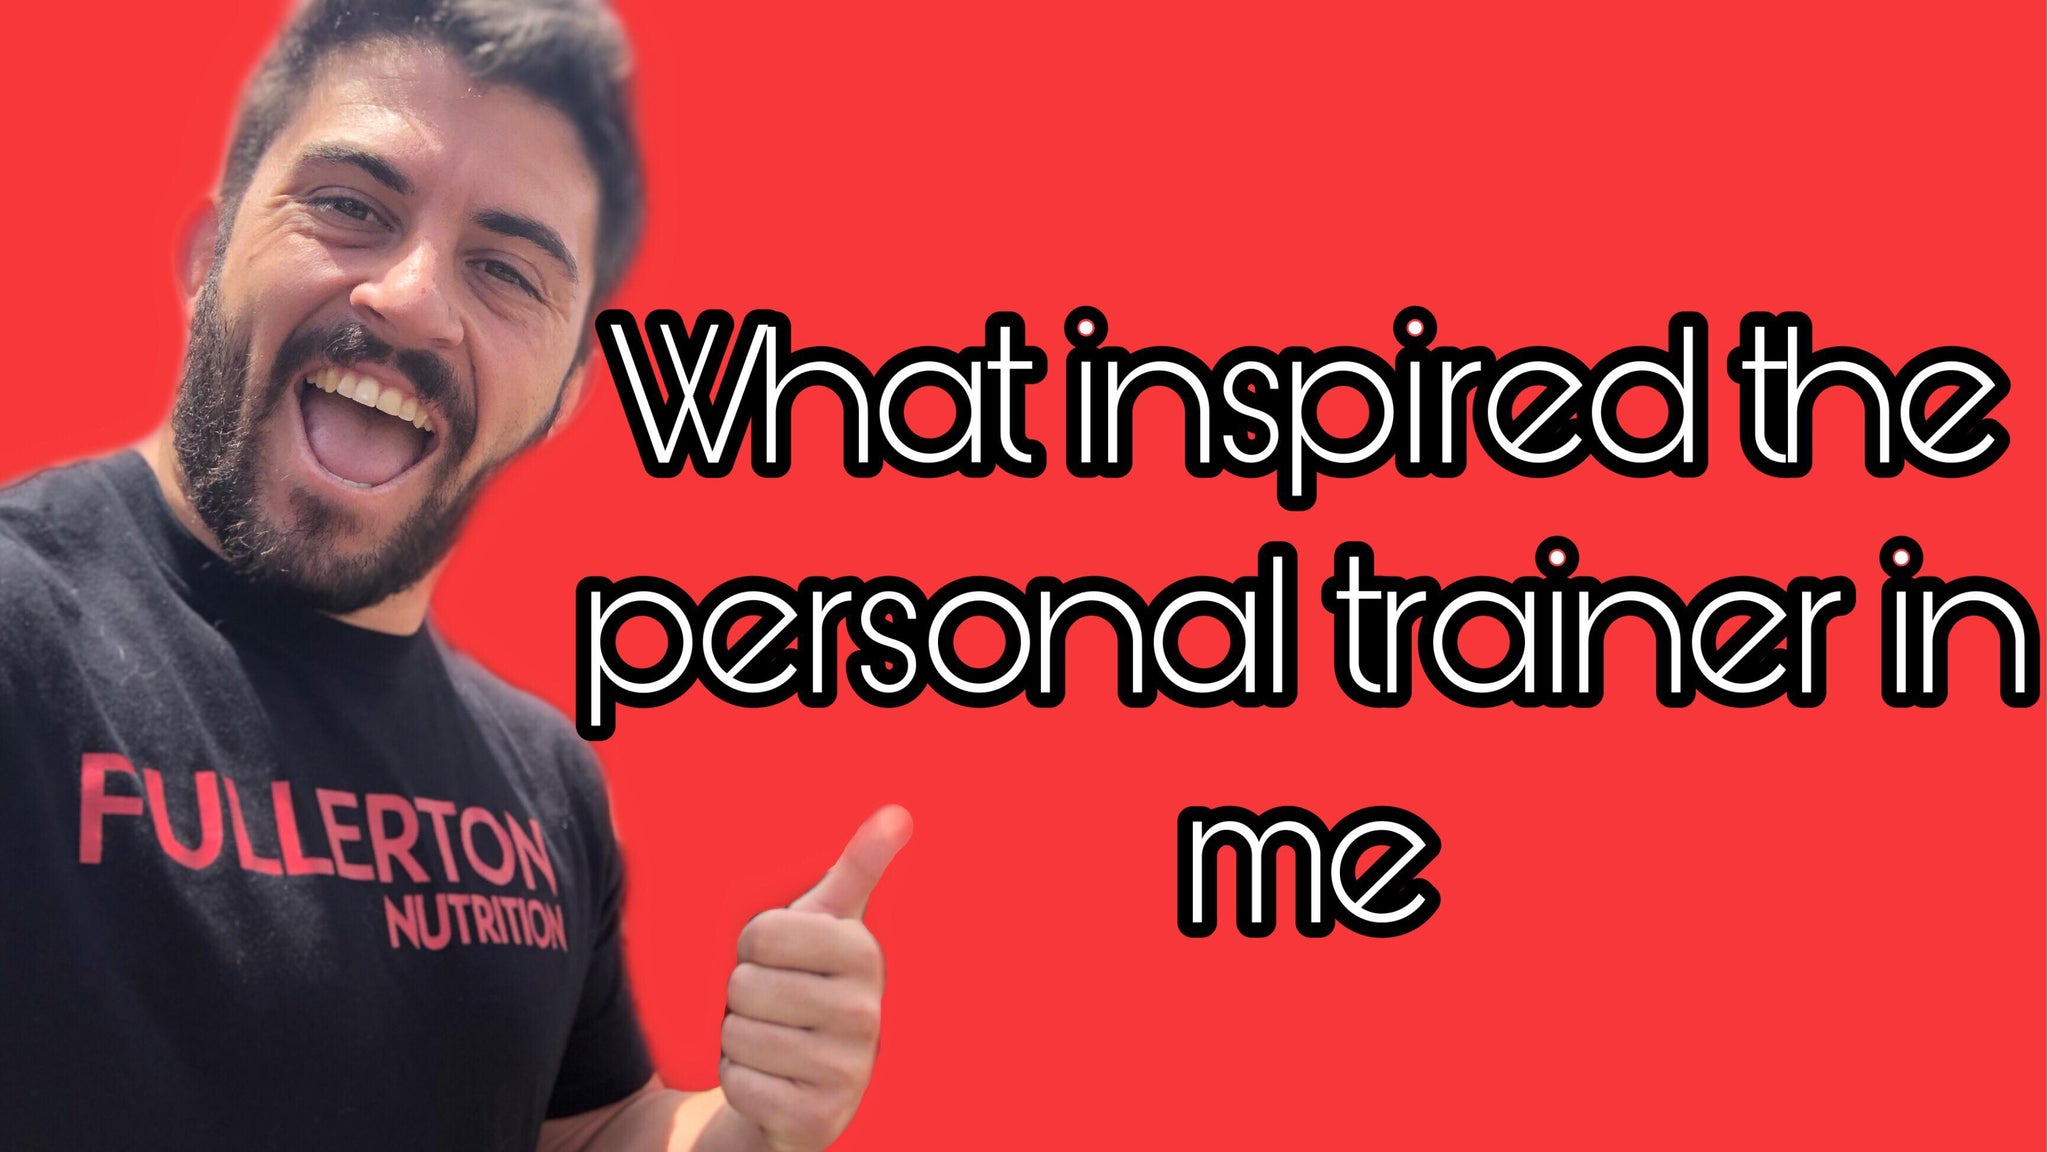 What inspired the personal trainer in me